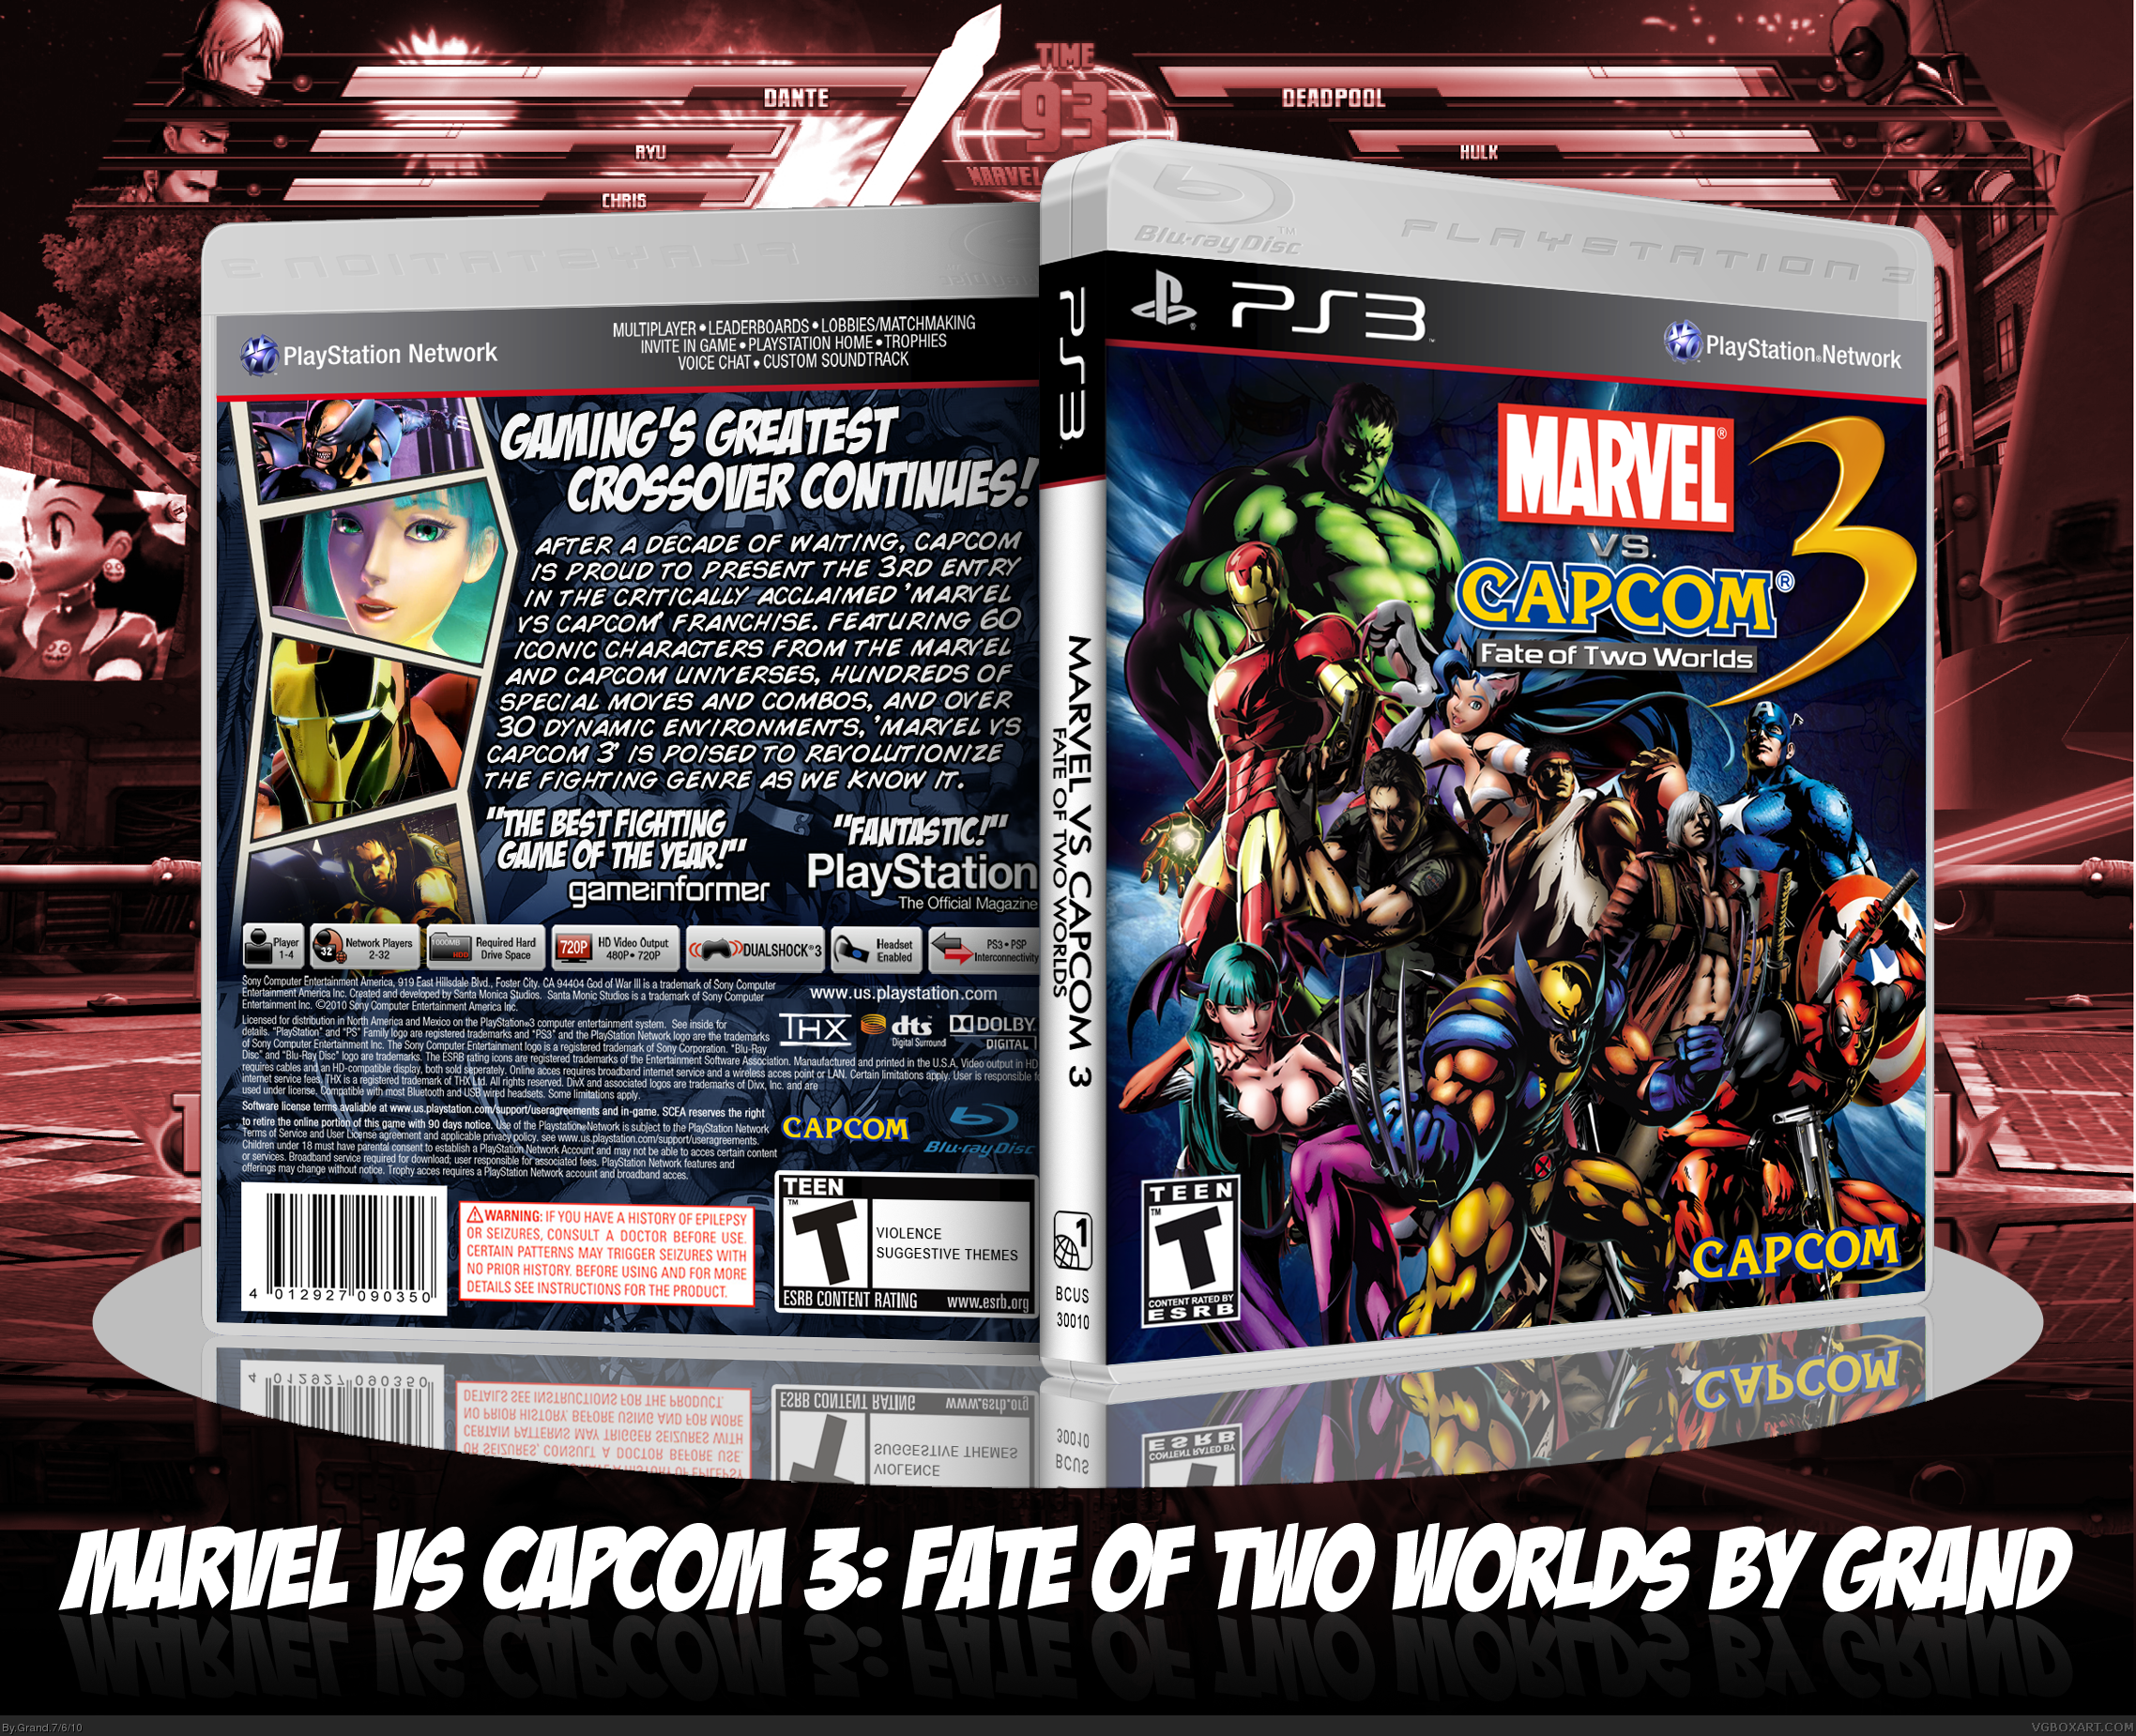 Marvel Vs. Capcom 3: Fate of Two Worlds box cover